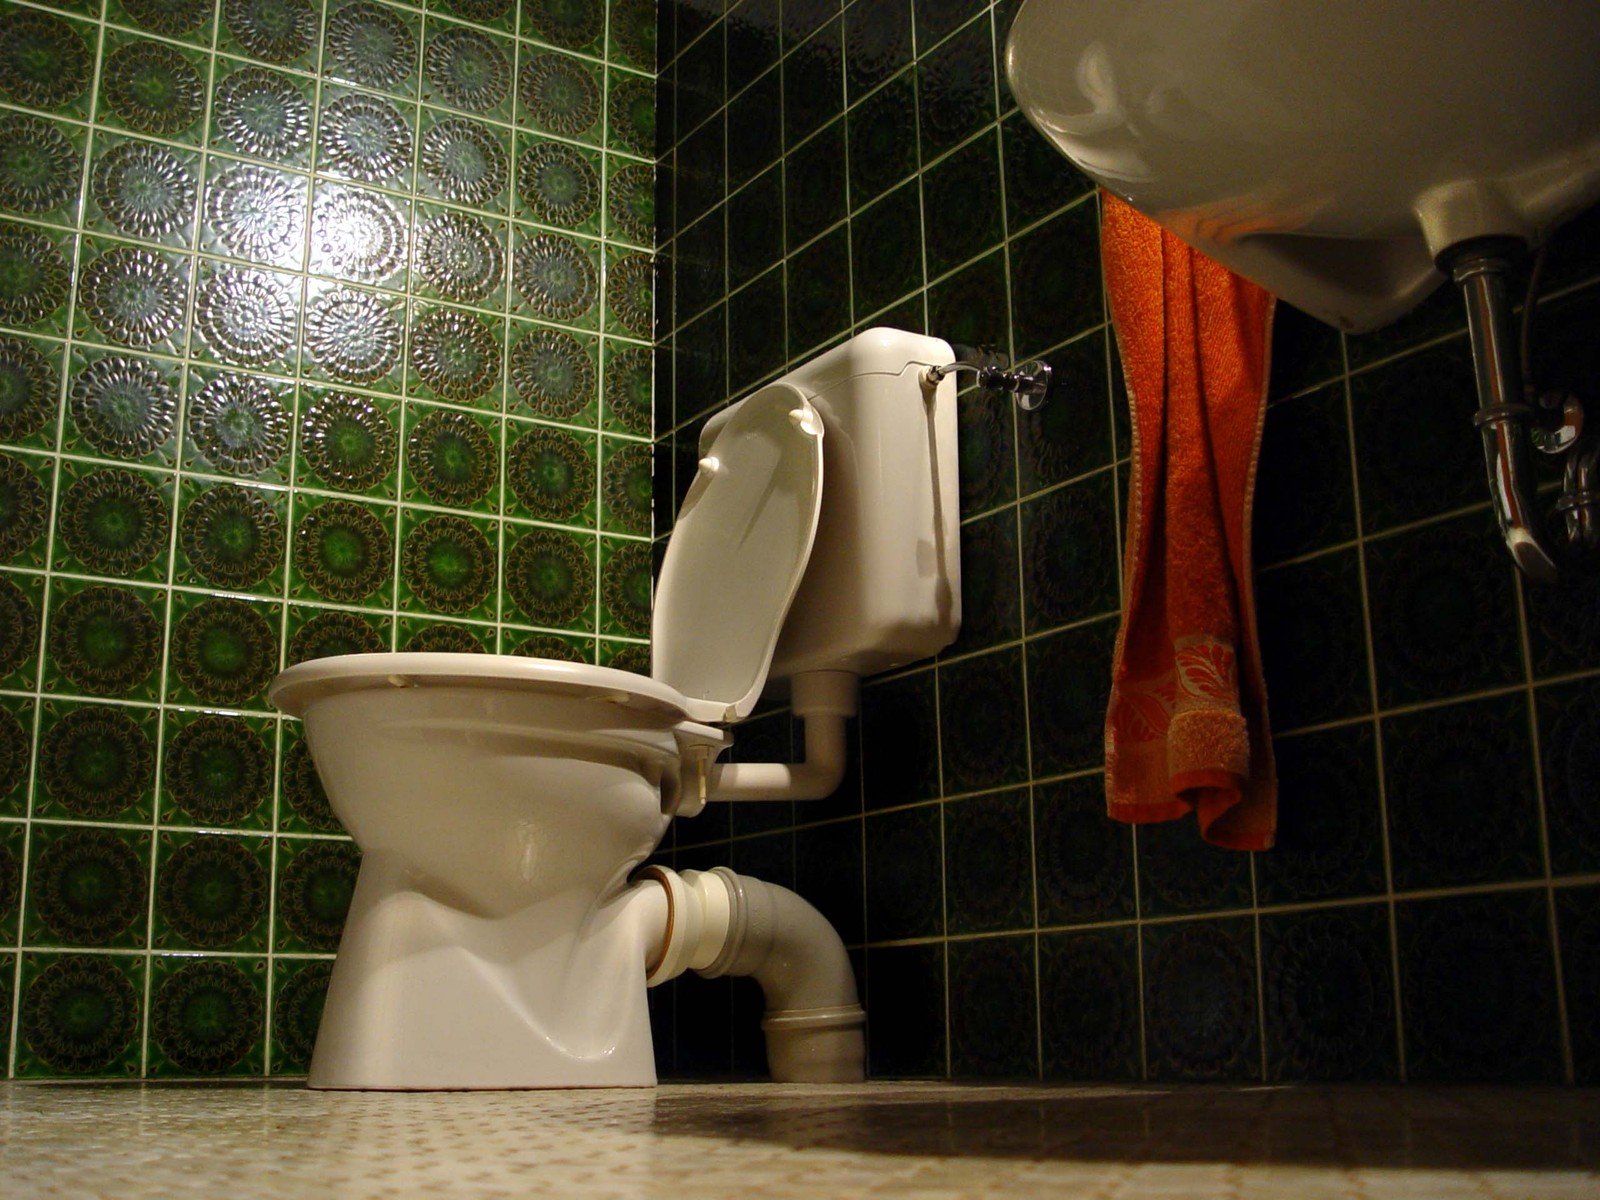 a white toilet in a green bathroom surrounded by tile